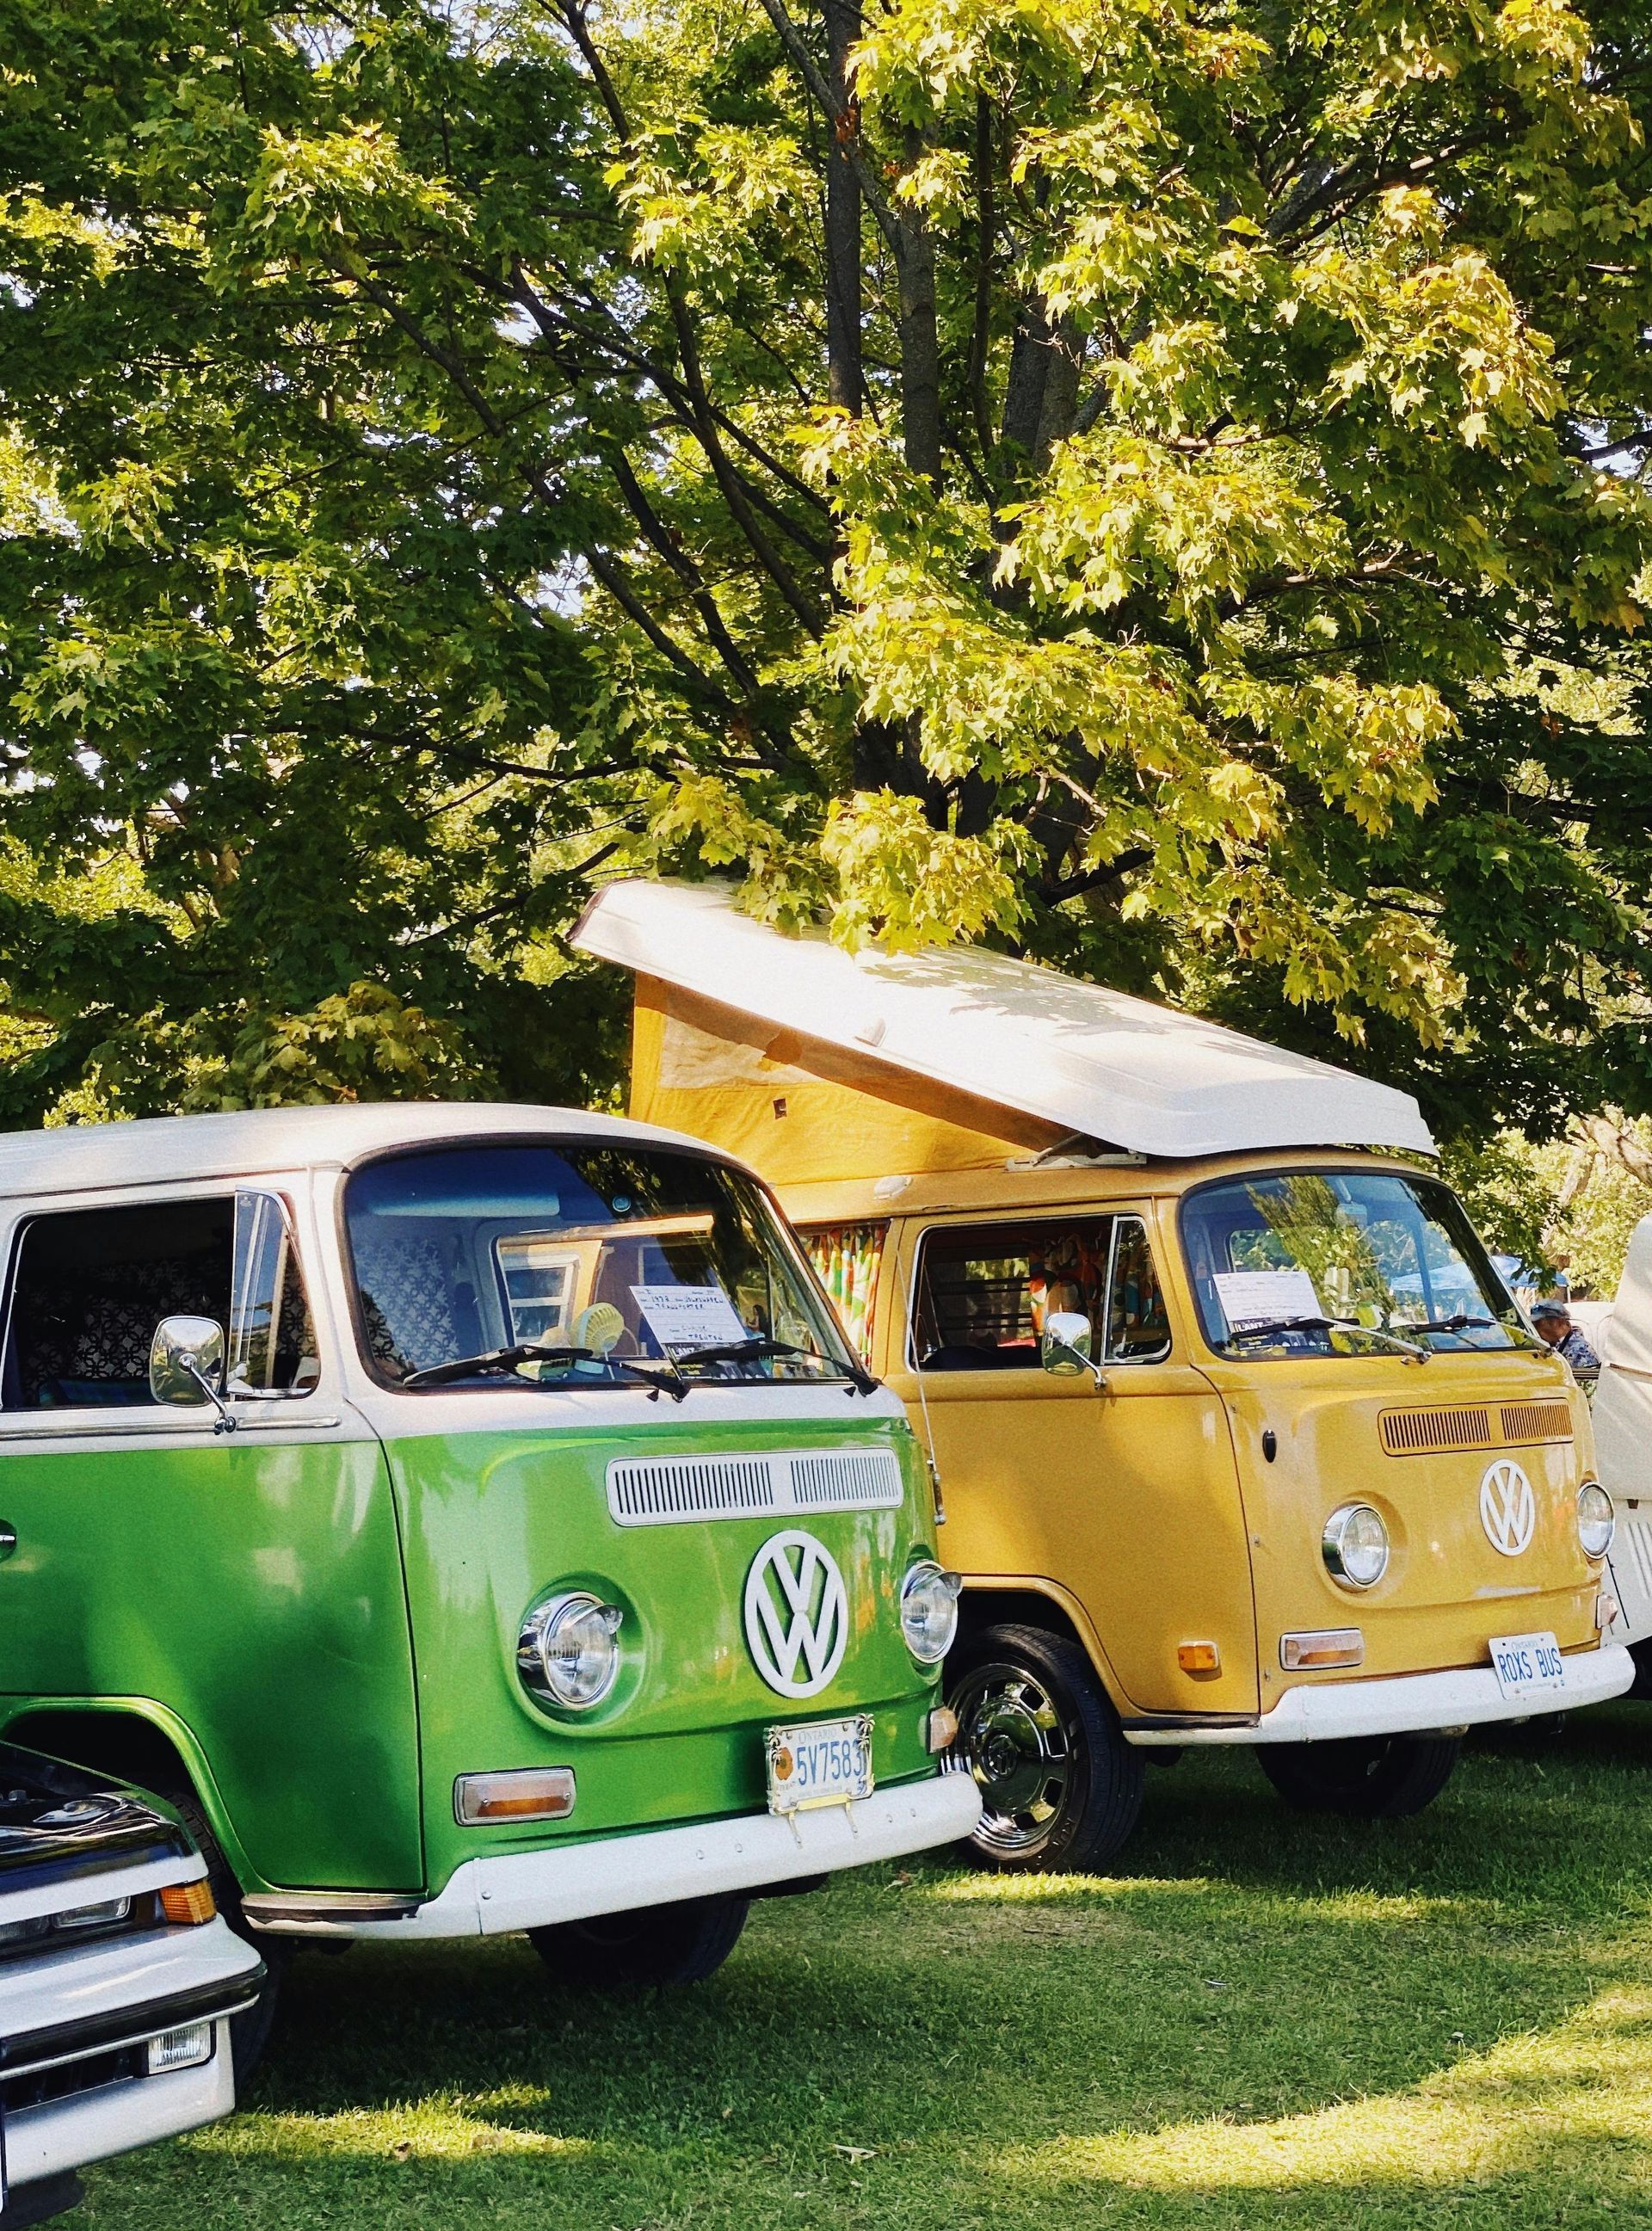 A green and yellow van are parked next to each other in a grassy field.